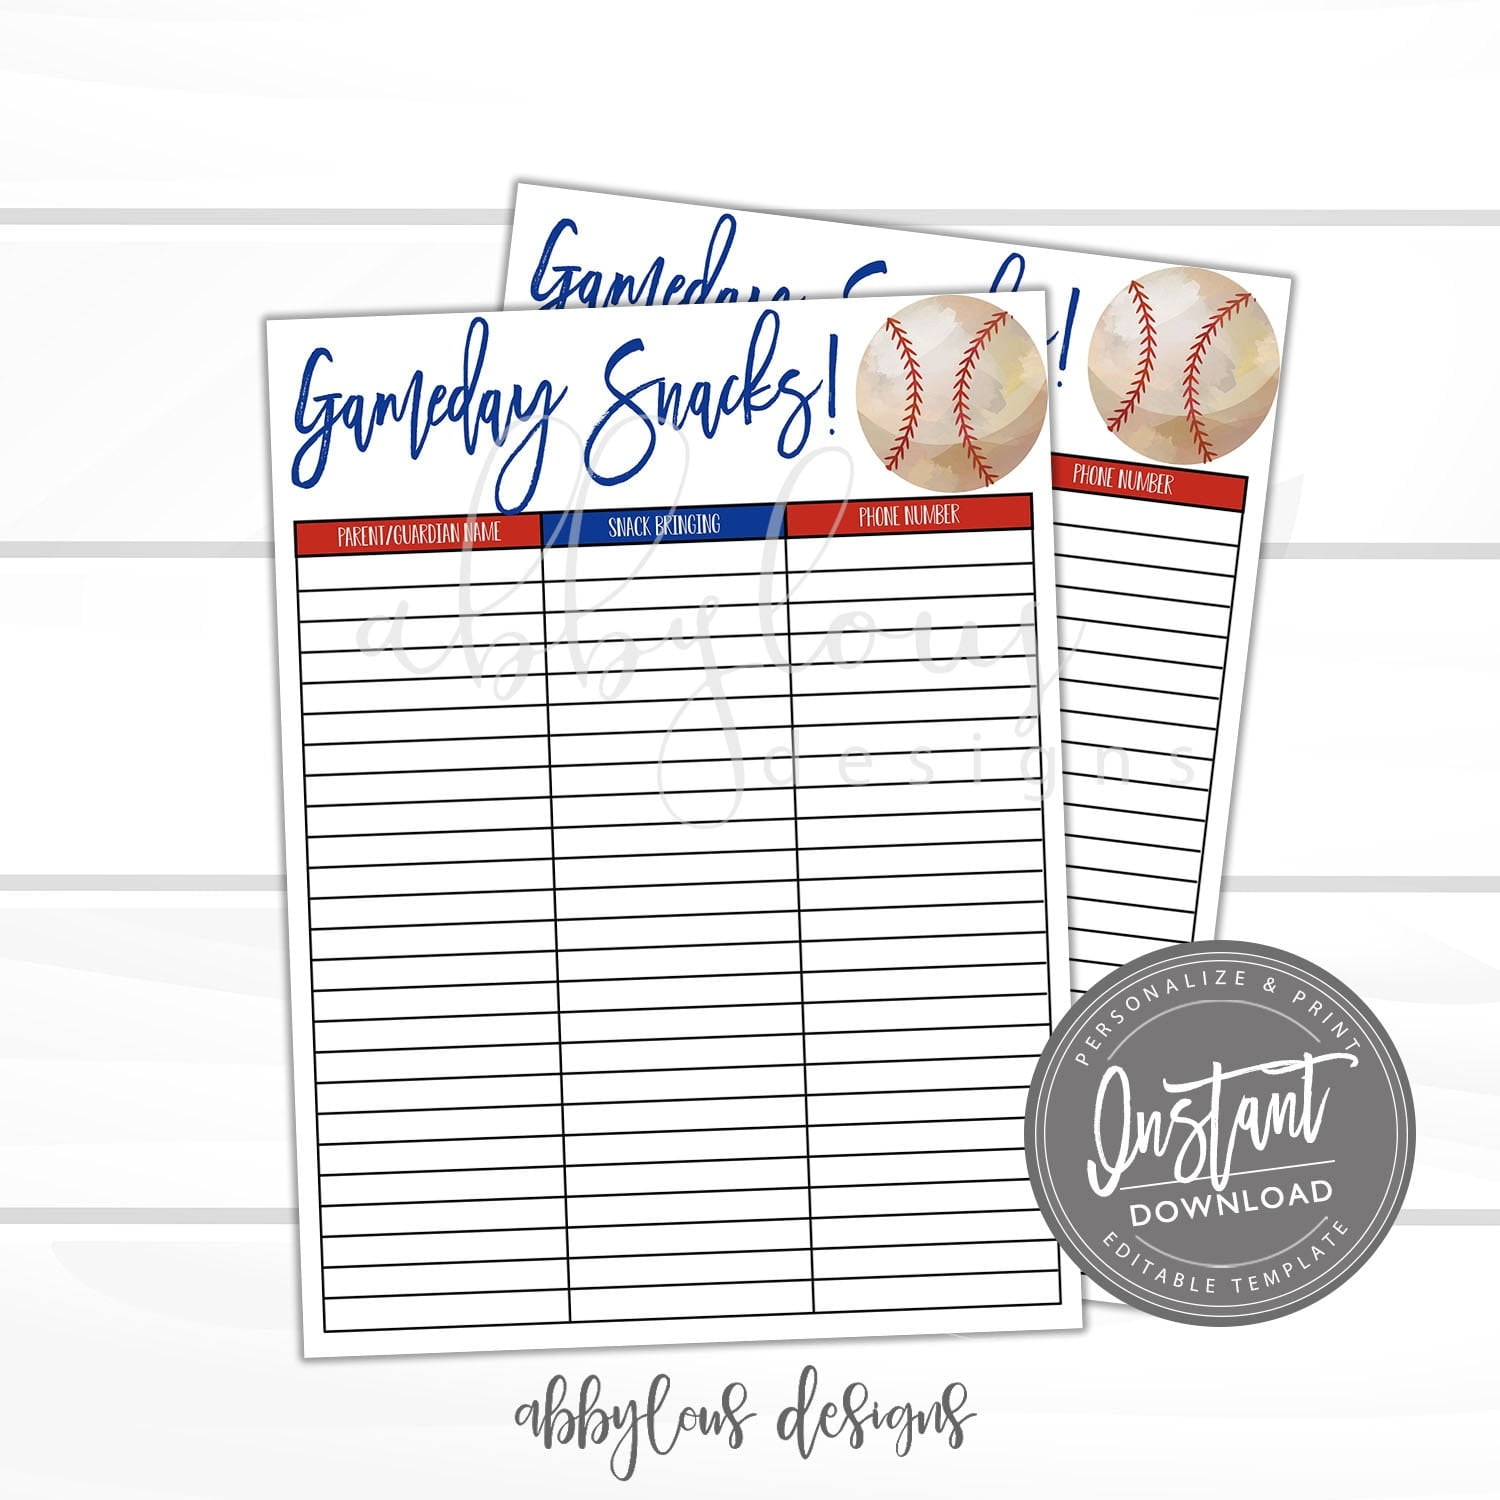 Editable Baseball Schedule Game And Practice Schedule Customizable Baseball Schedule Any Team Team Lineup Printable Instant Access Monsoonempress